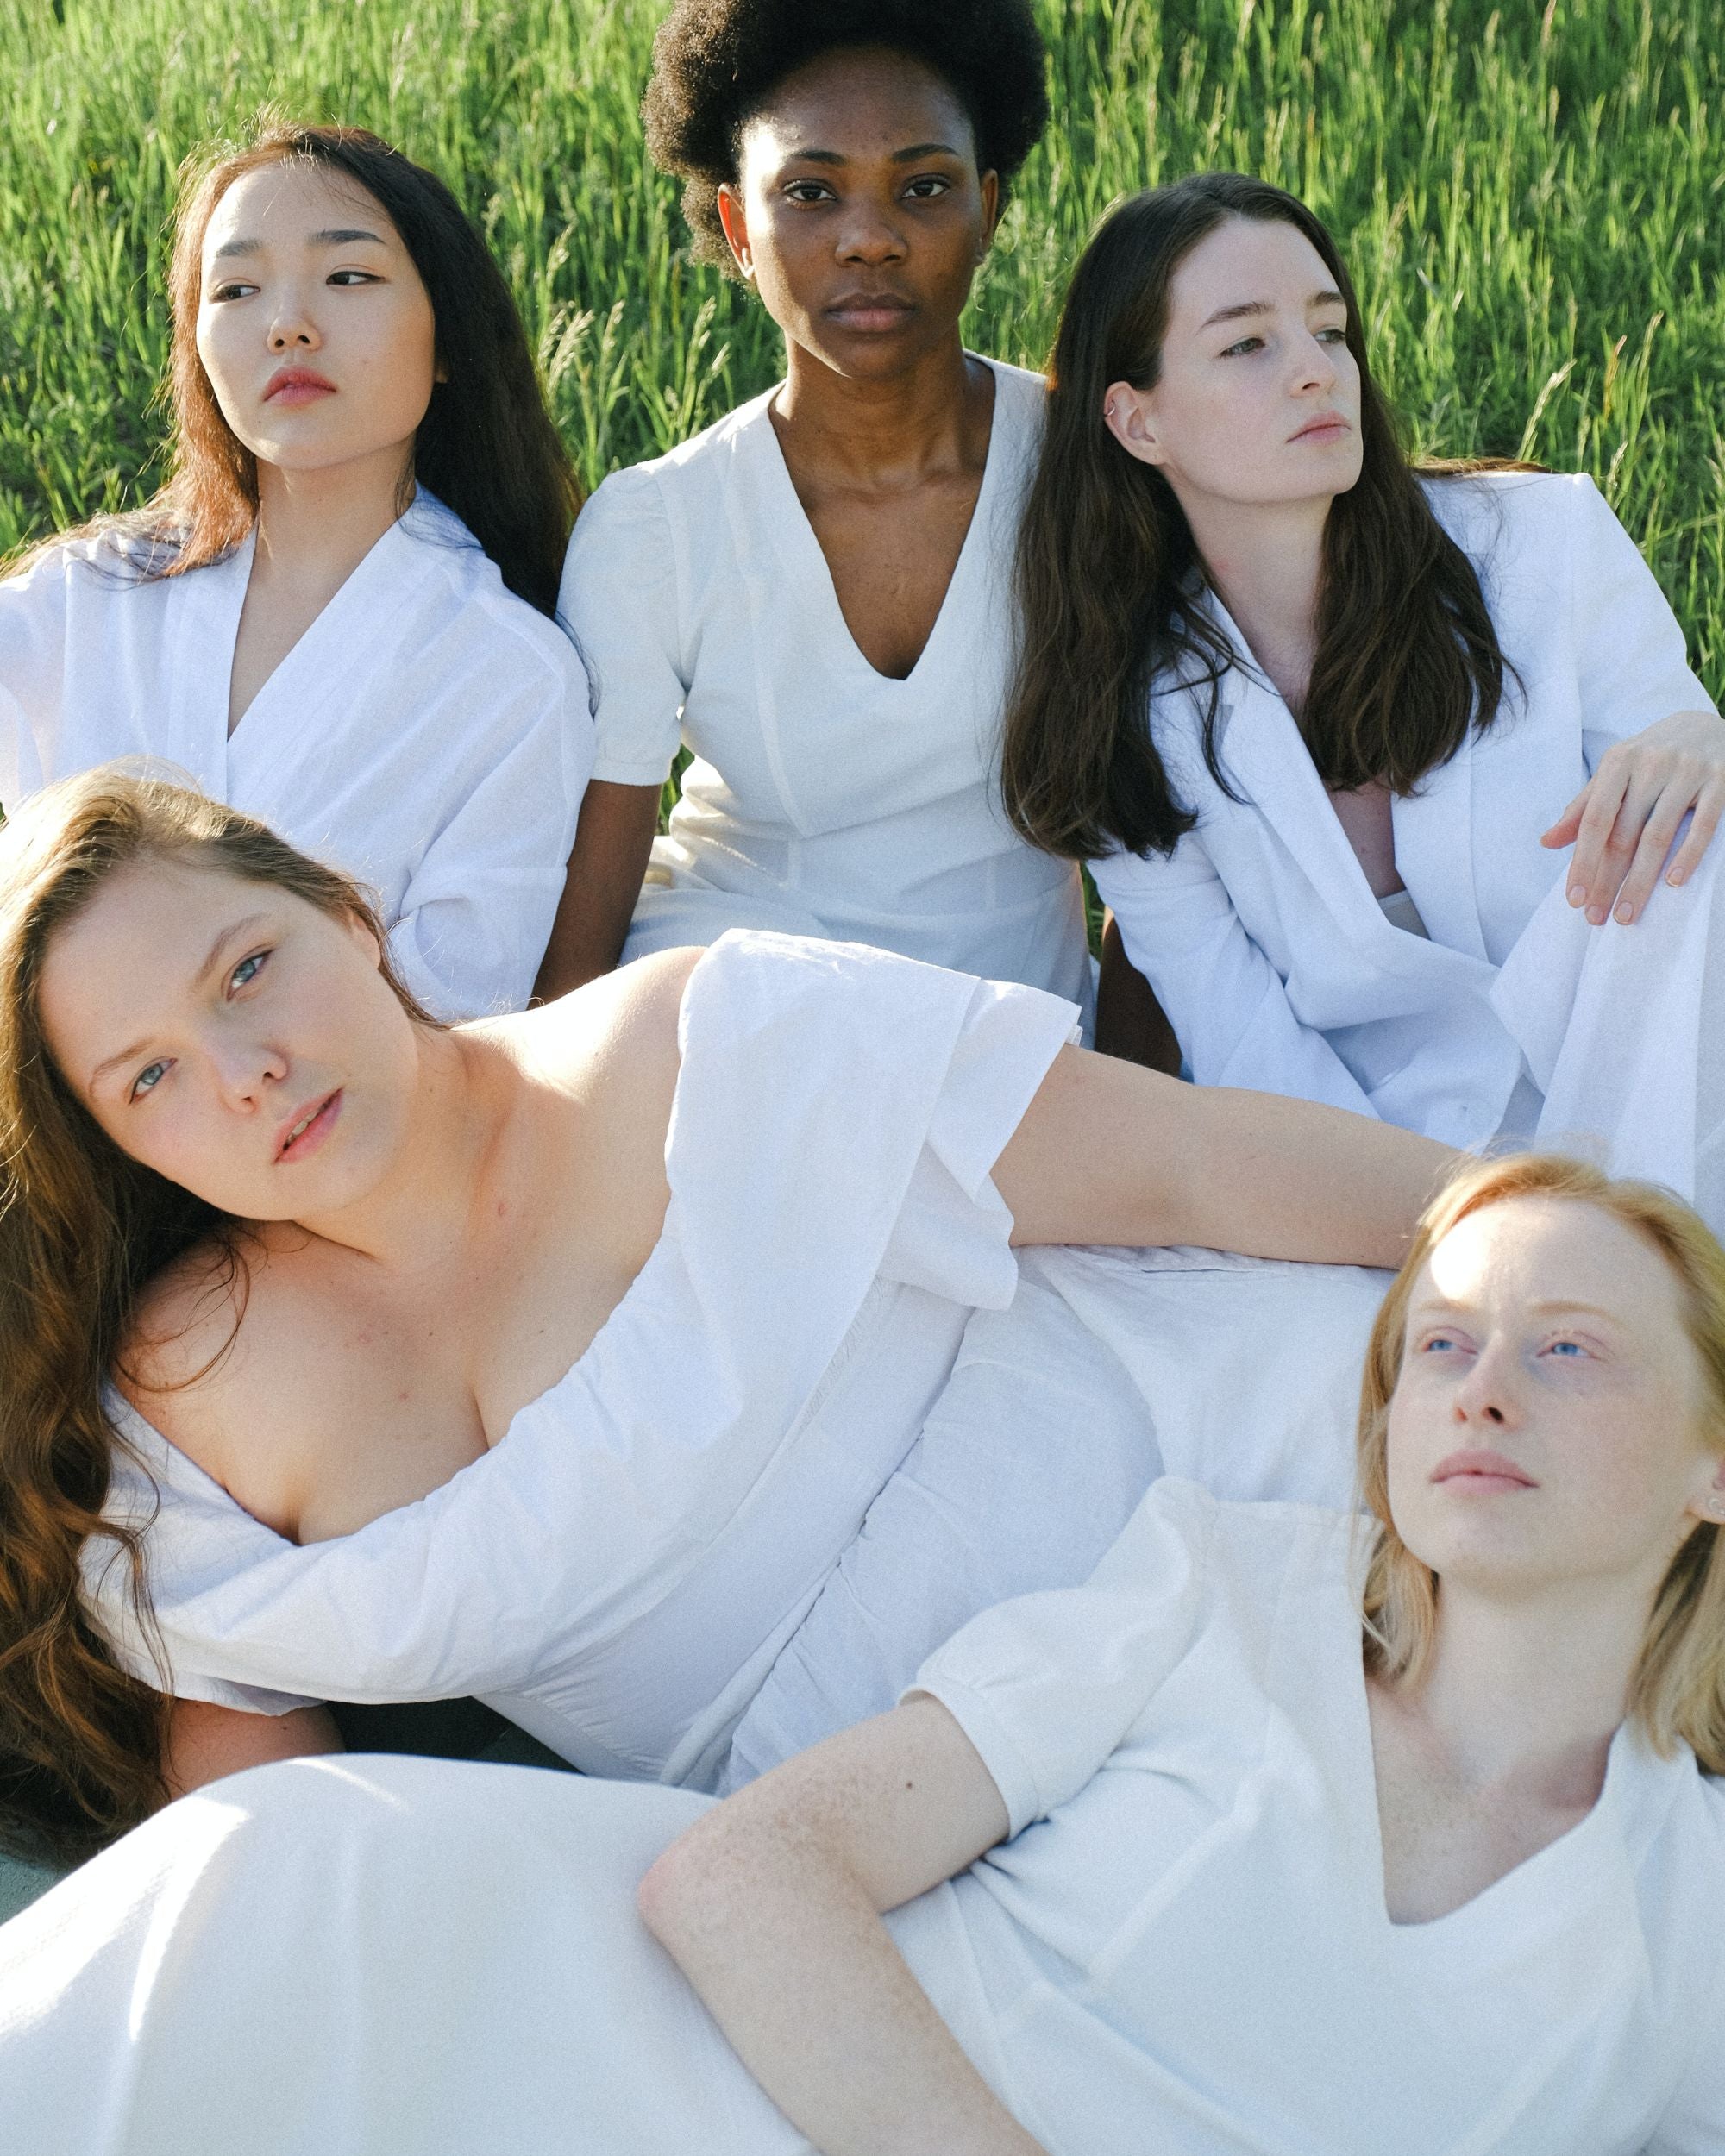 Diverse Women in white clothing sitting on green grass in a field